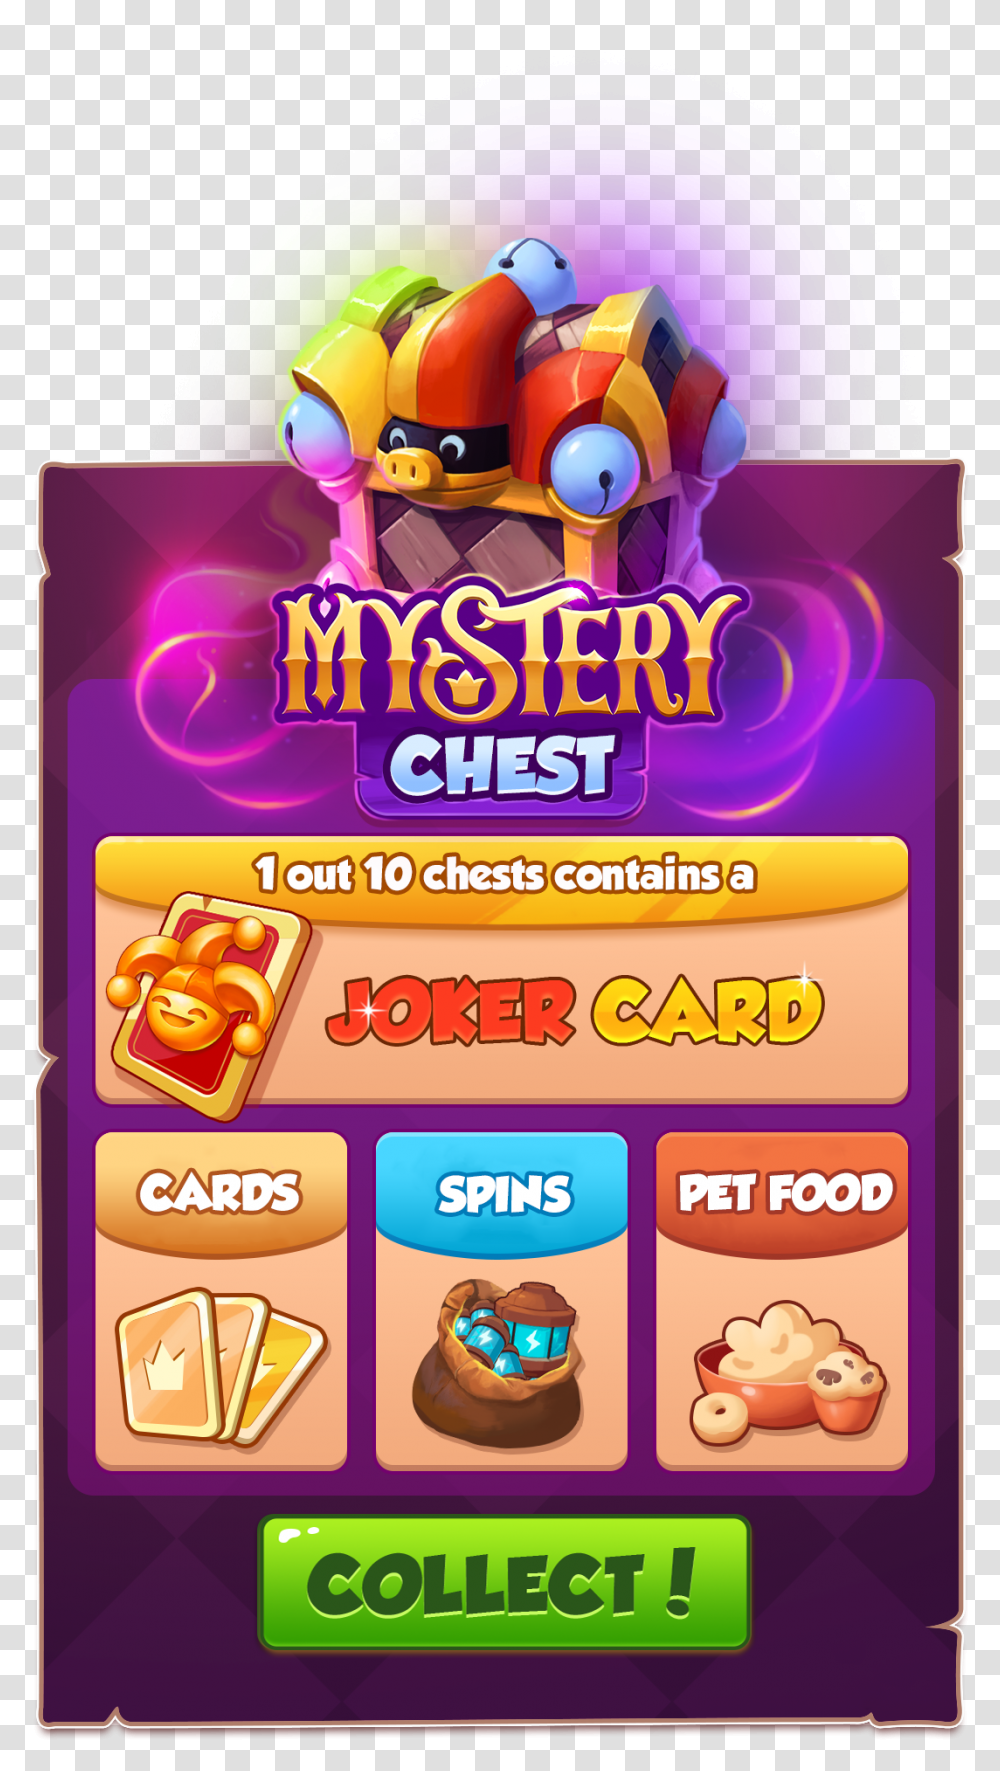 Get Mystery Chests In Coin Master, Angry Birds, Dvd, Disk Transparent Png